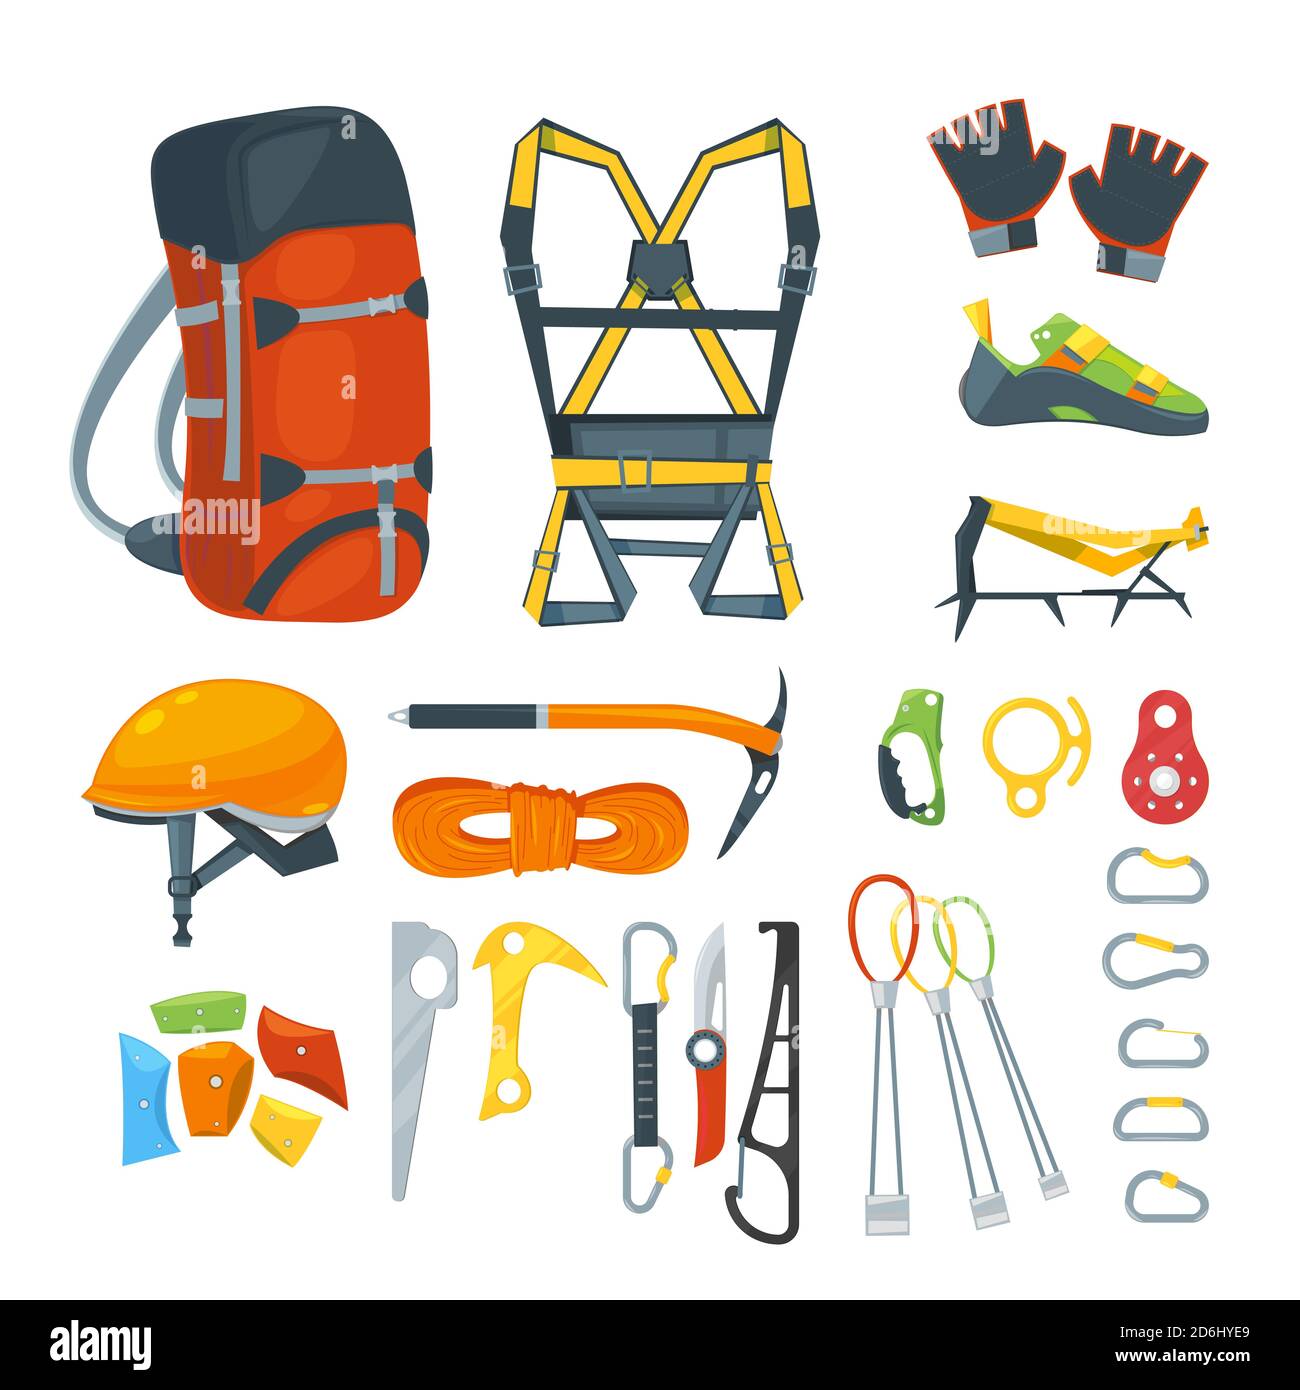 Climbing equipment, vector icons and design elements set. Mountaineering extreme sport gears and accessories, cartoon style illustration. Stock Vector